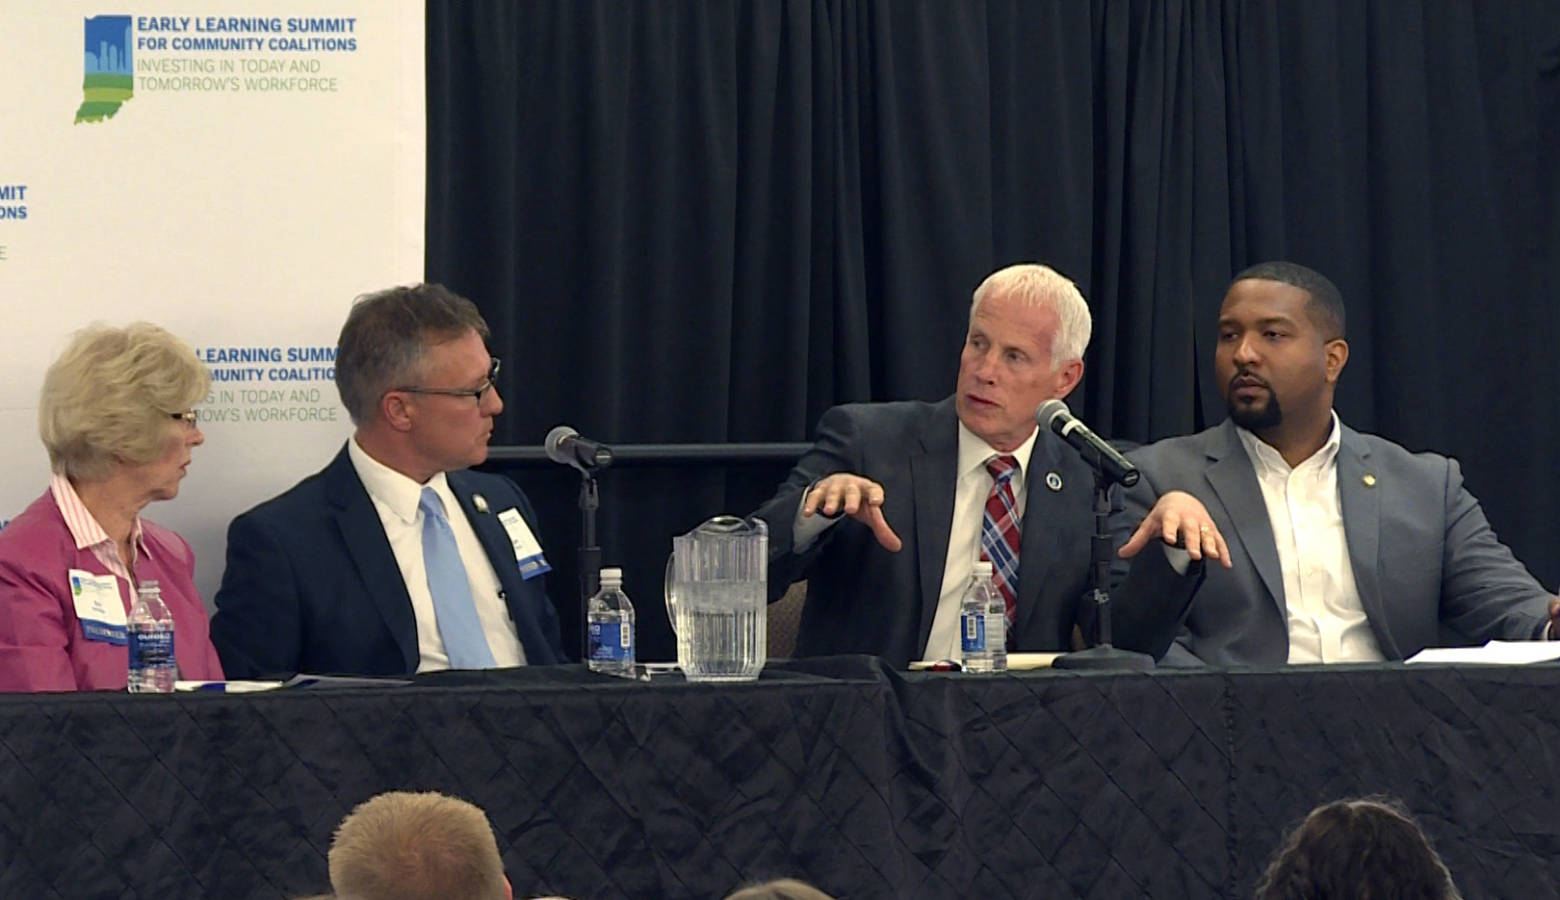 Four lawmakers discussed early learning during a panel session Tuesday: Rep. Sue Errington (D-Muncie), Sen. Jeff Raatz (R-Centerville), Rep. Bob Behning (R-Indianapolis), and Sen. Eddie Melton (D-Gary). (Jeanie Lindsay/IPB News)